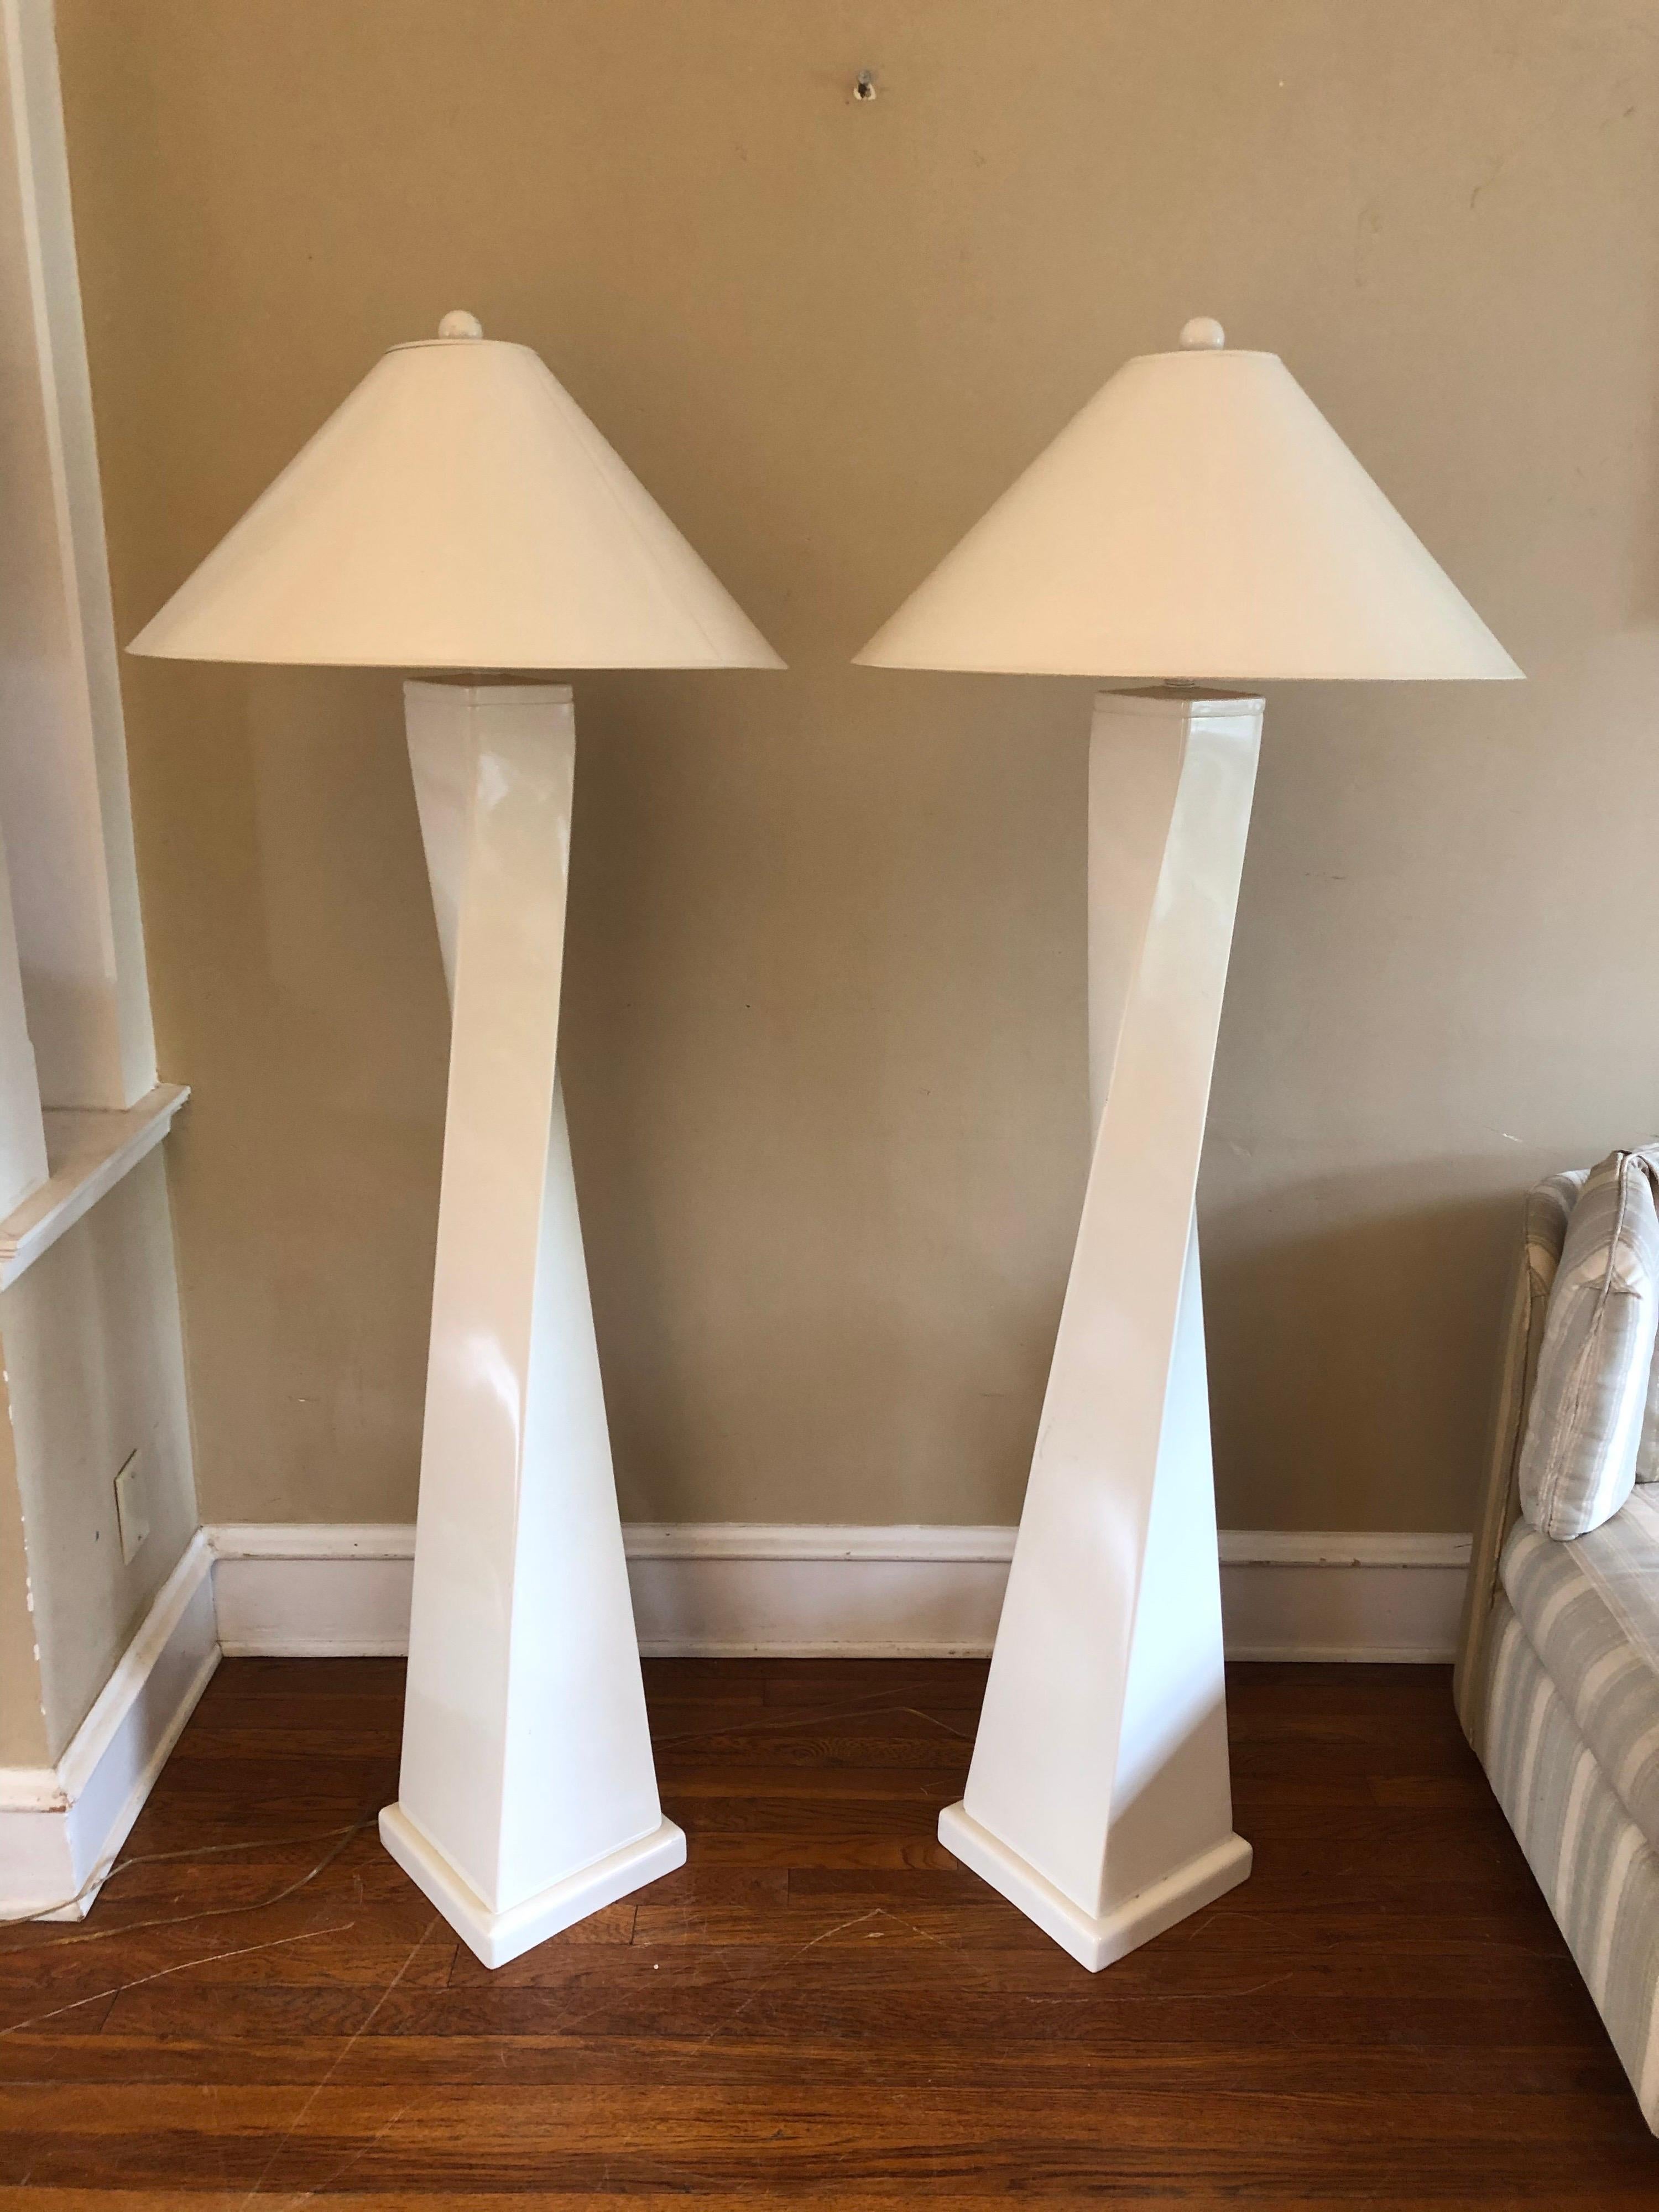 Interesting “twisted” Post-mod floor lamps by Tyndale Lighting, a division of Frederick Cooper. Original shades will be included, a high-gloss cream color, matching the lamps. They’re seemingly lacquered over ceramic. They’re in excellent condition.